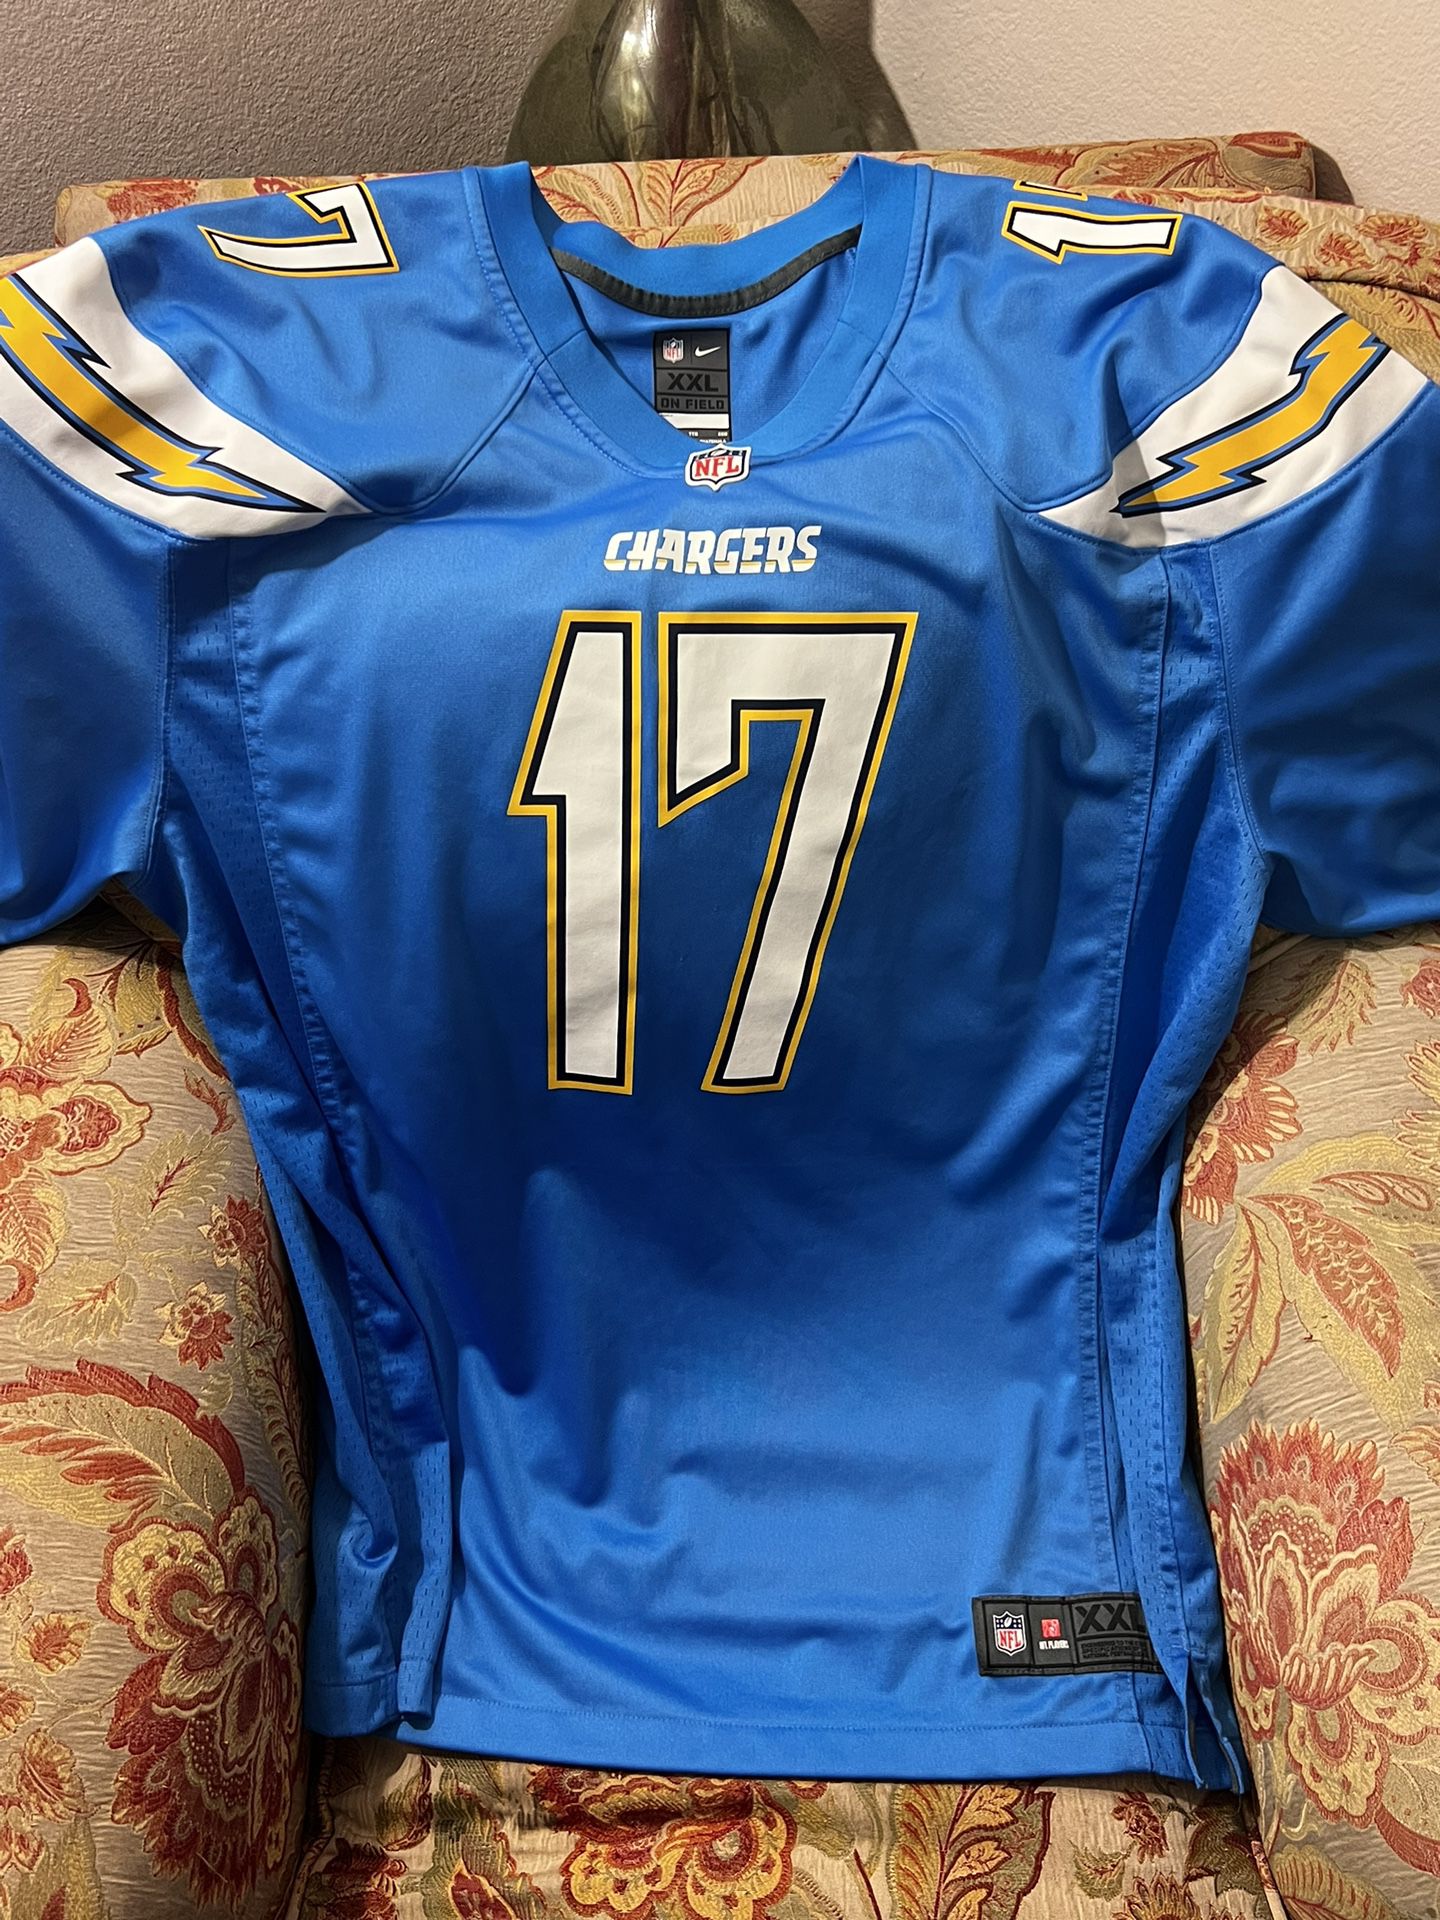 Chargers Jersey 